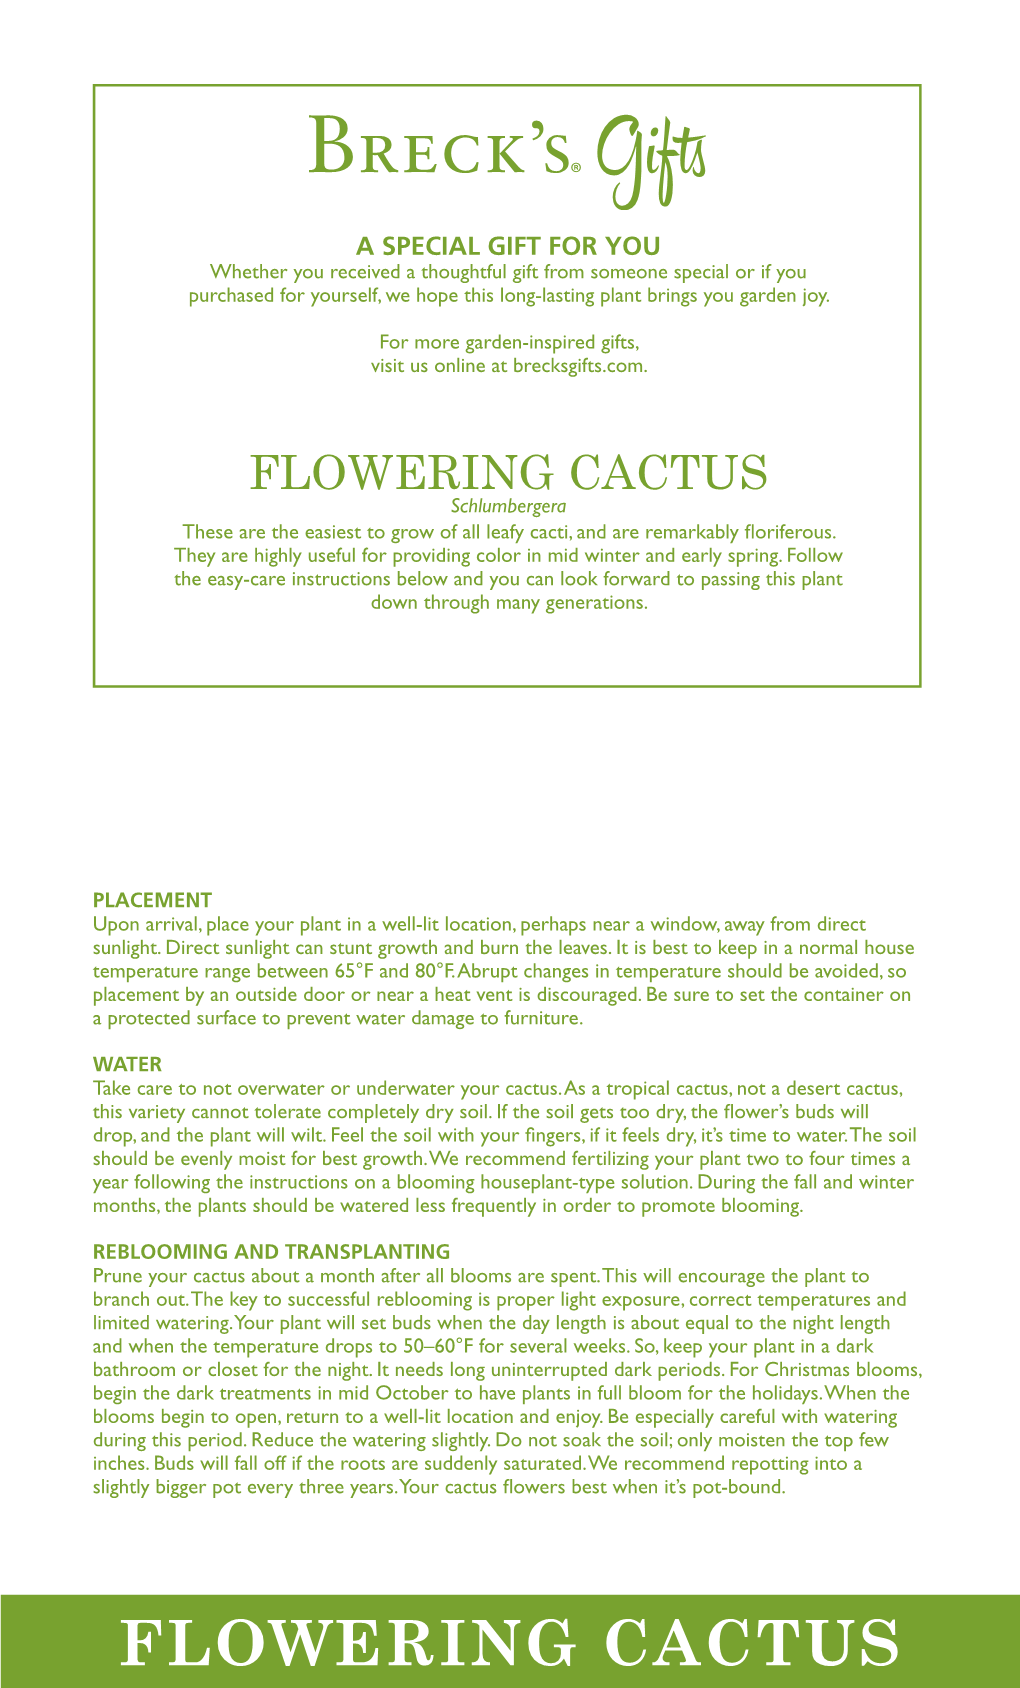 FLOWERING CACTUS Schlumbergera These Are the Easiest to Grow of All Leafy Cacti, and Are Remarkably Oriferous